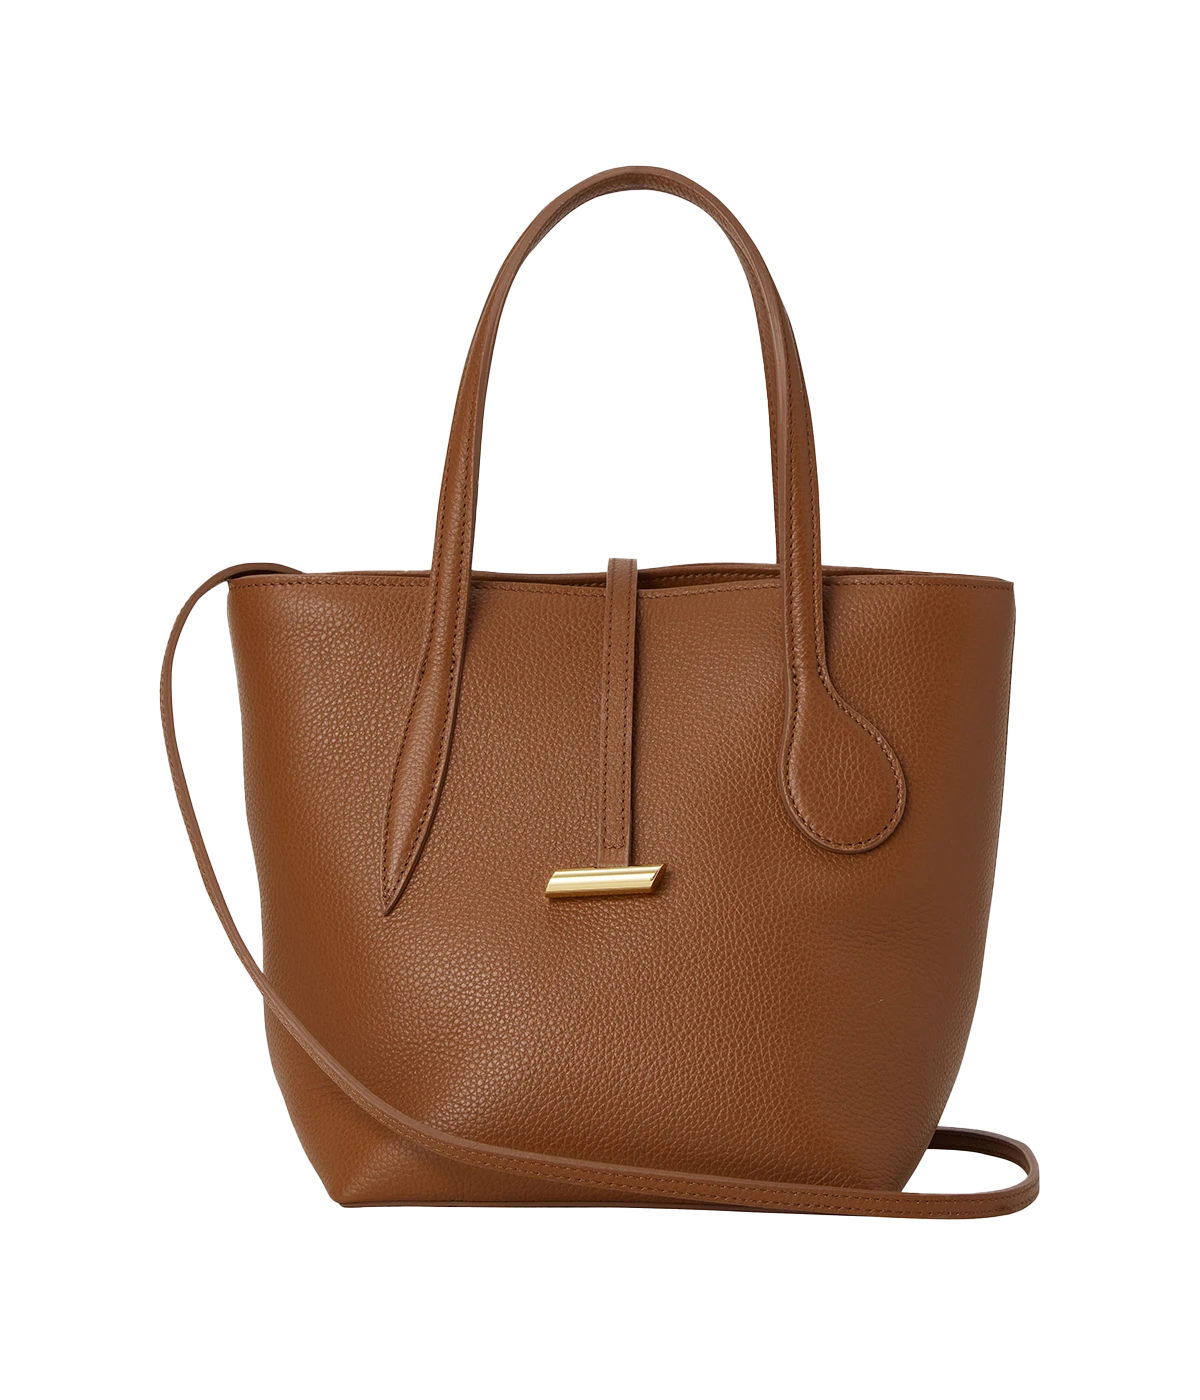 Sprout Mini Tote in Caramel